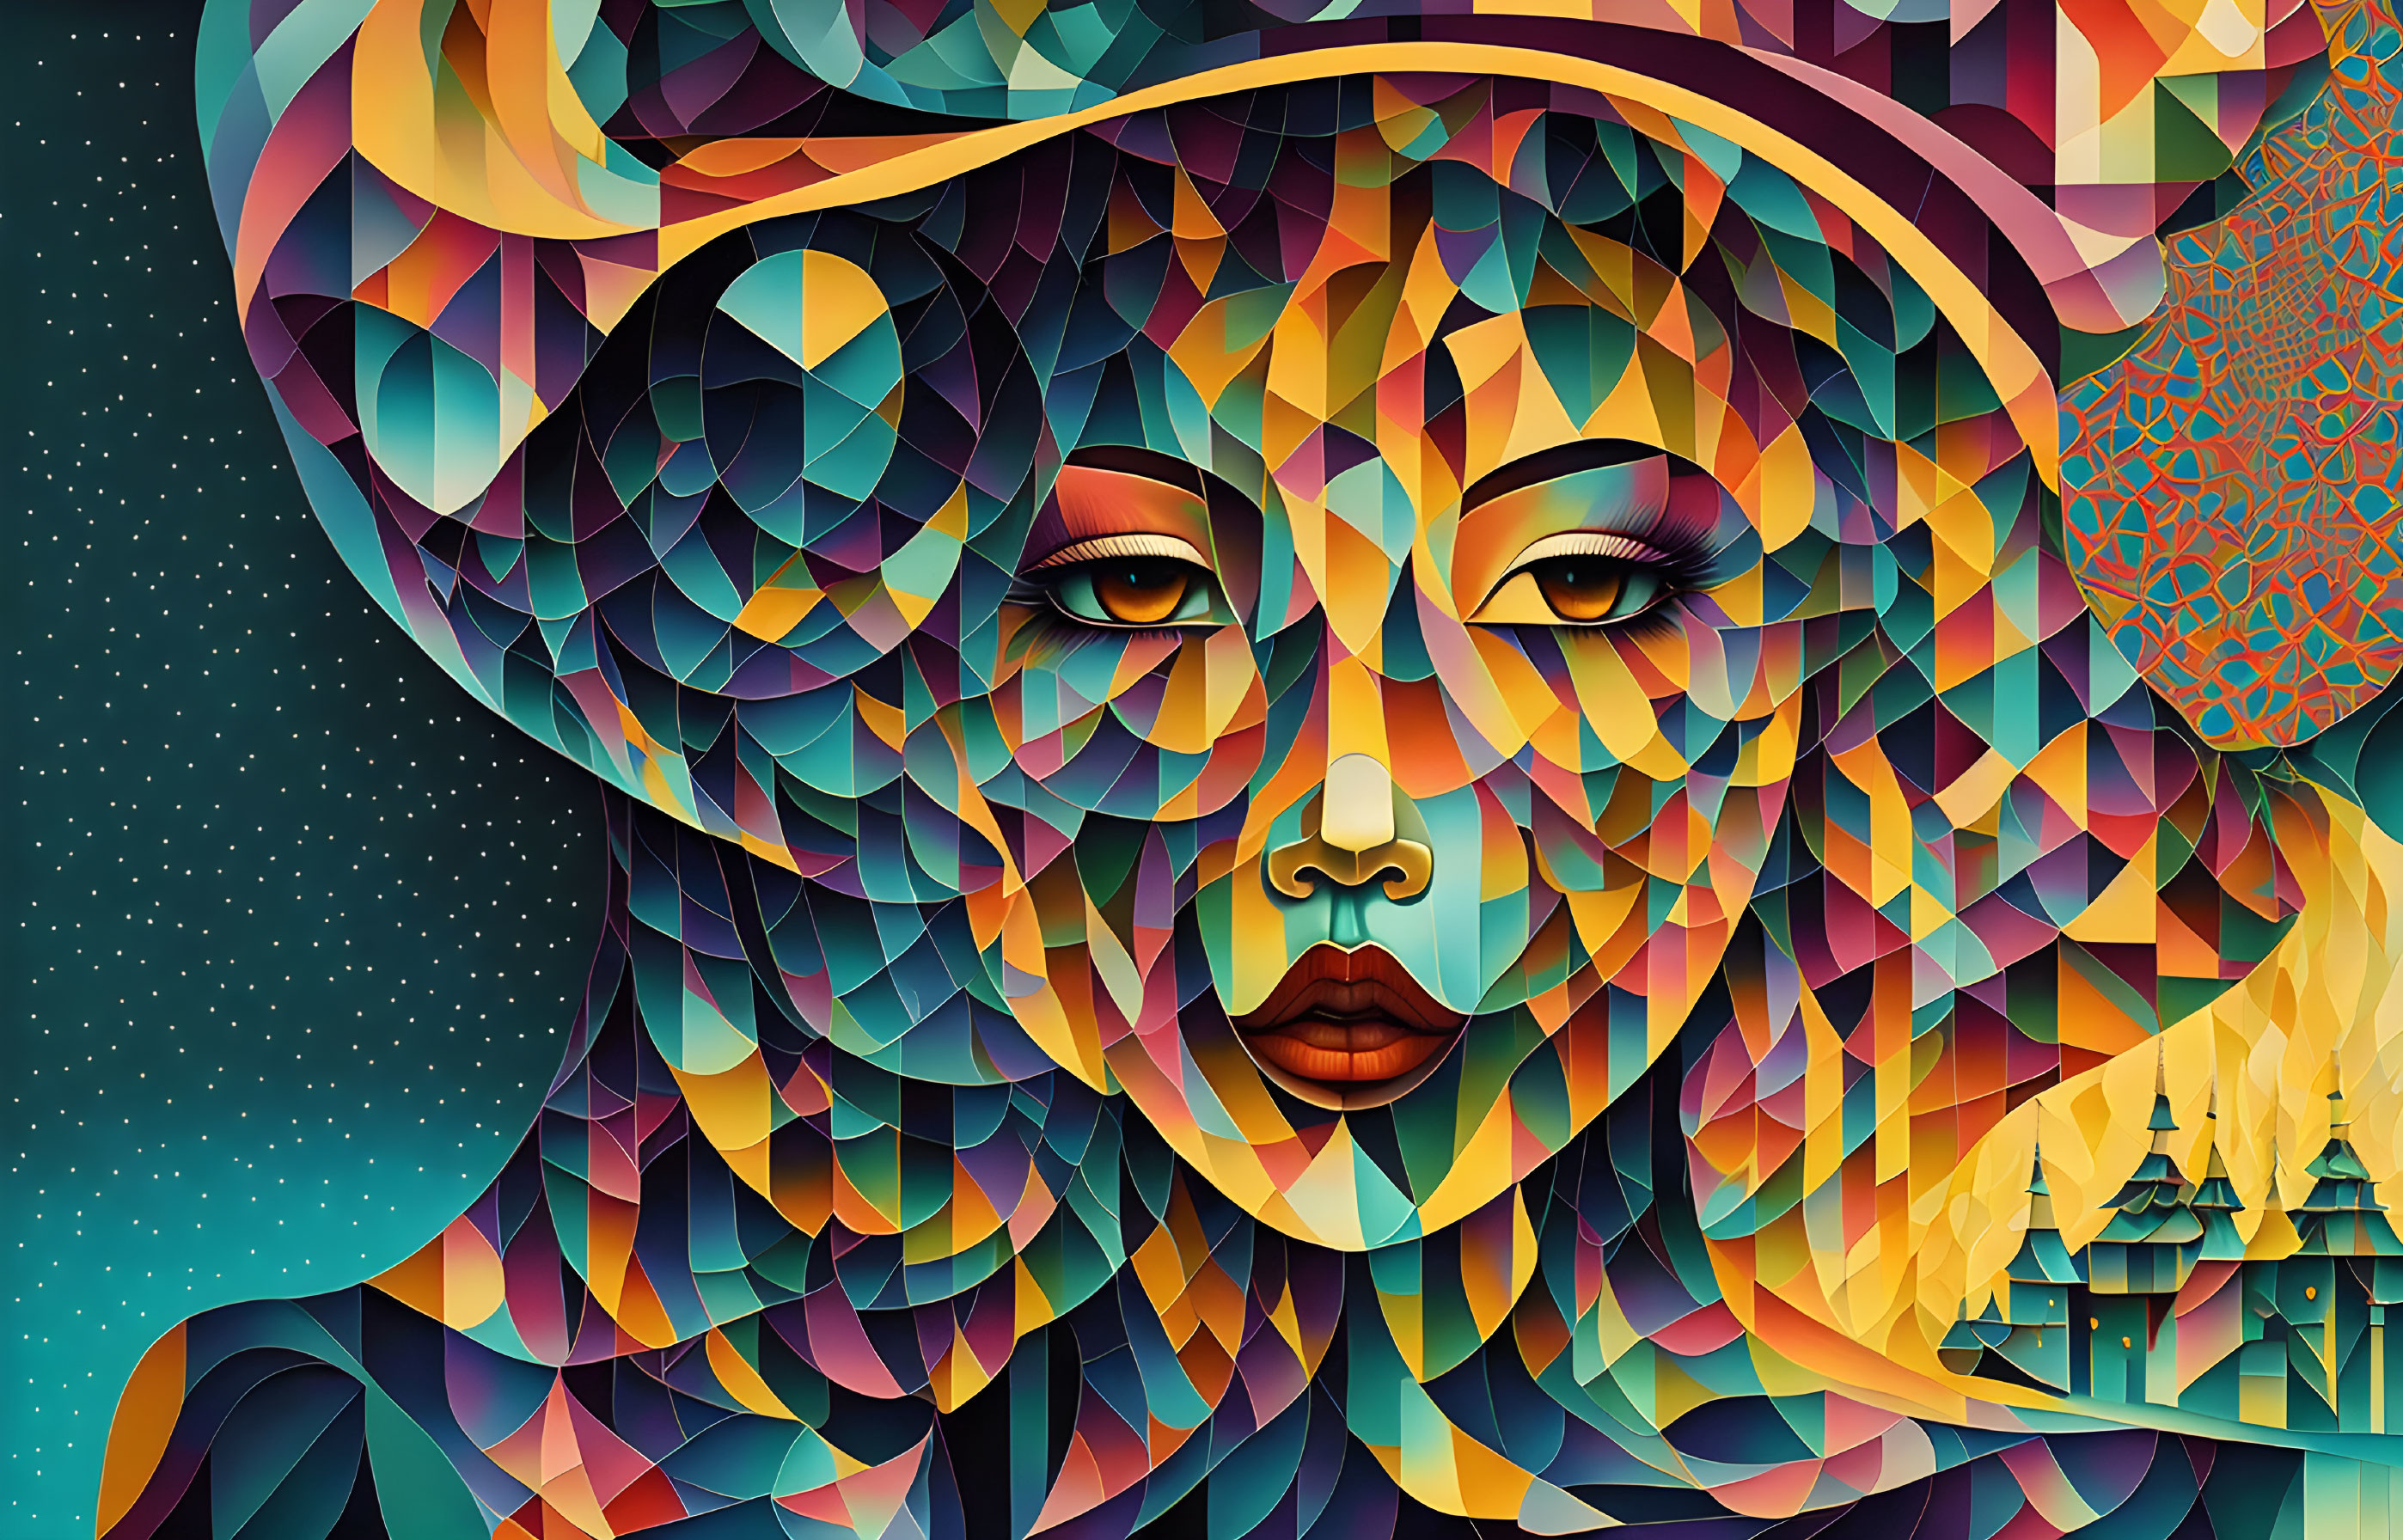 Abstract Woman's Face in Colorful Geometric Patterns on Starry Background